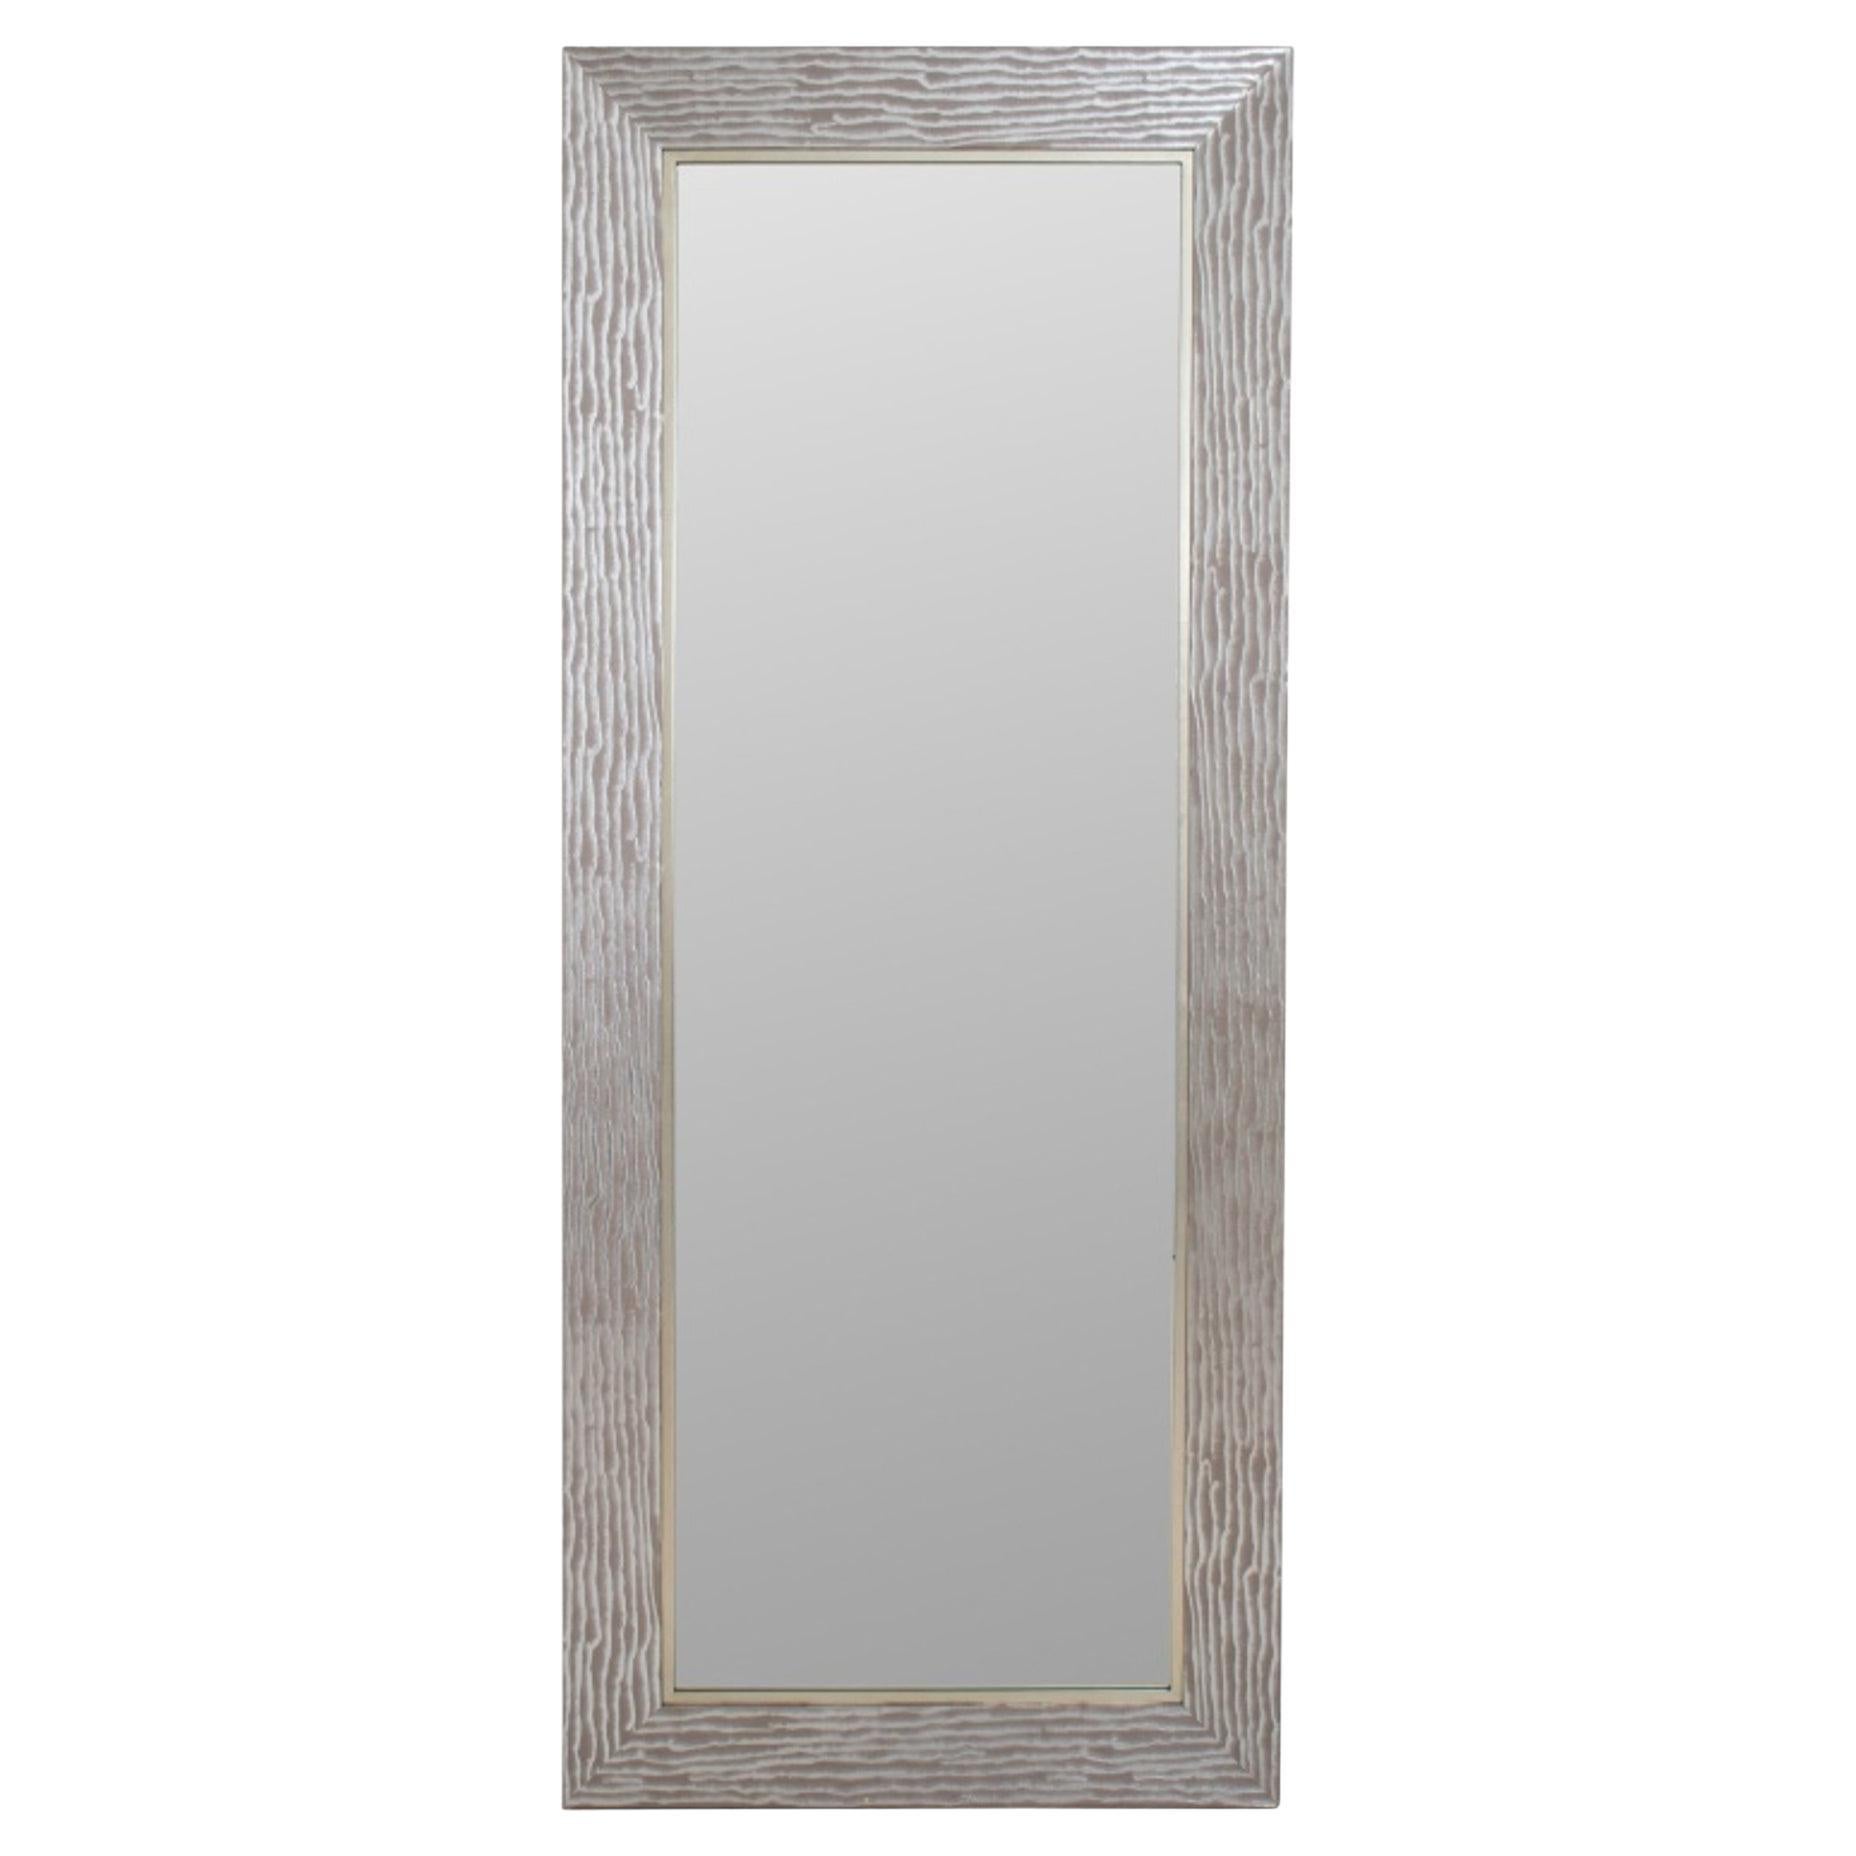 Large Uttermost Elongated Silvered Wood Mirror